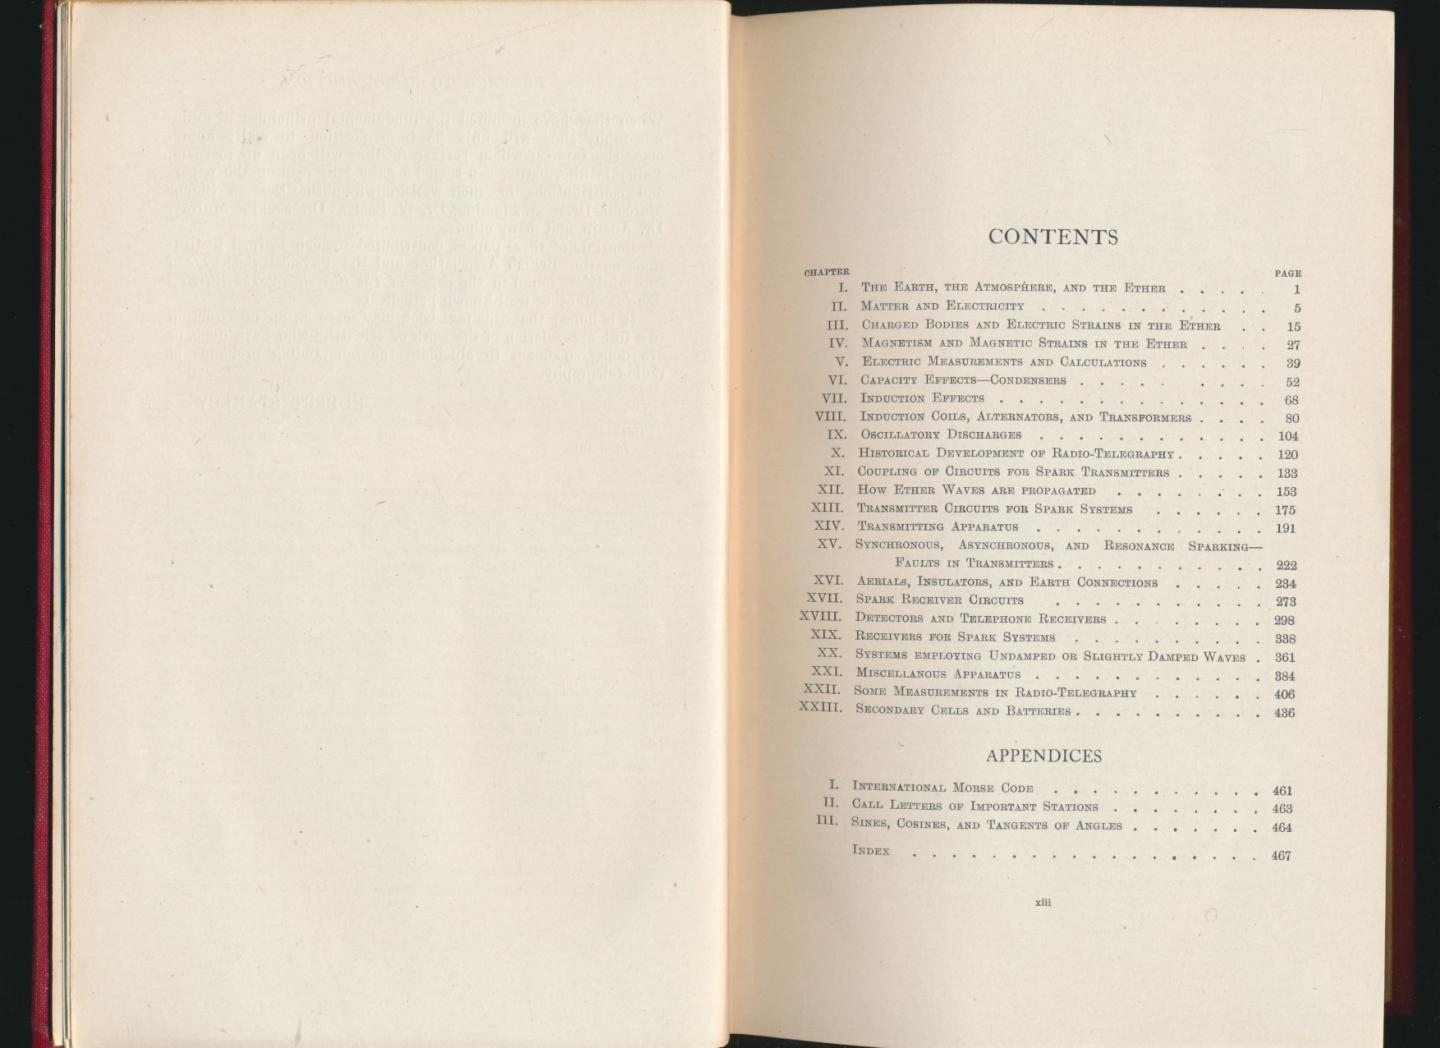 Stanley, Rupert - Text book on wireless telegraphy Volume I and II